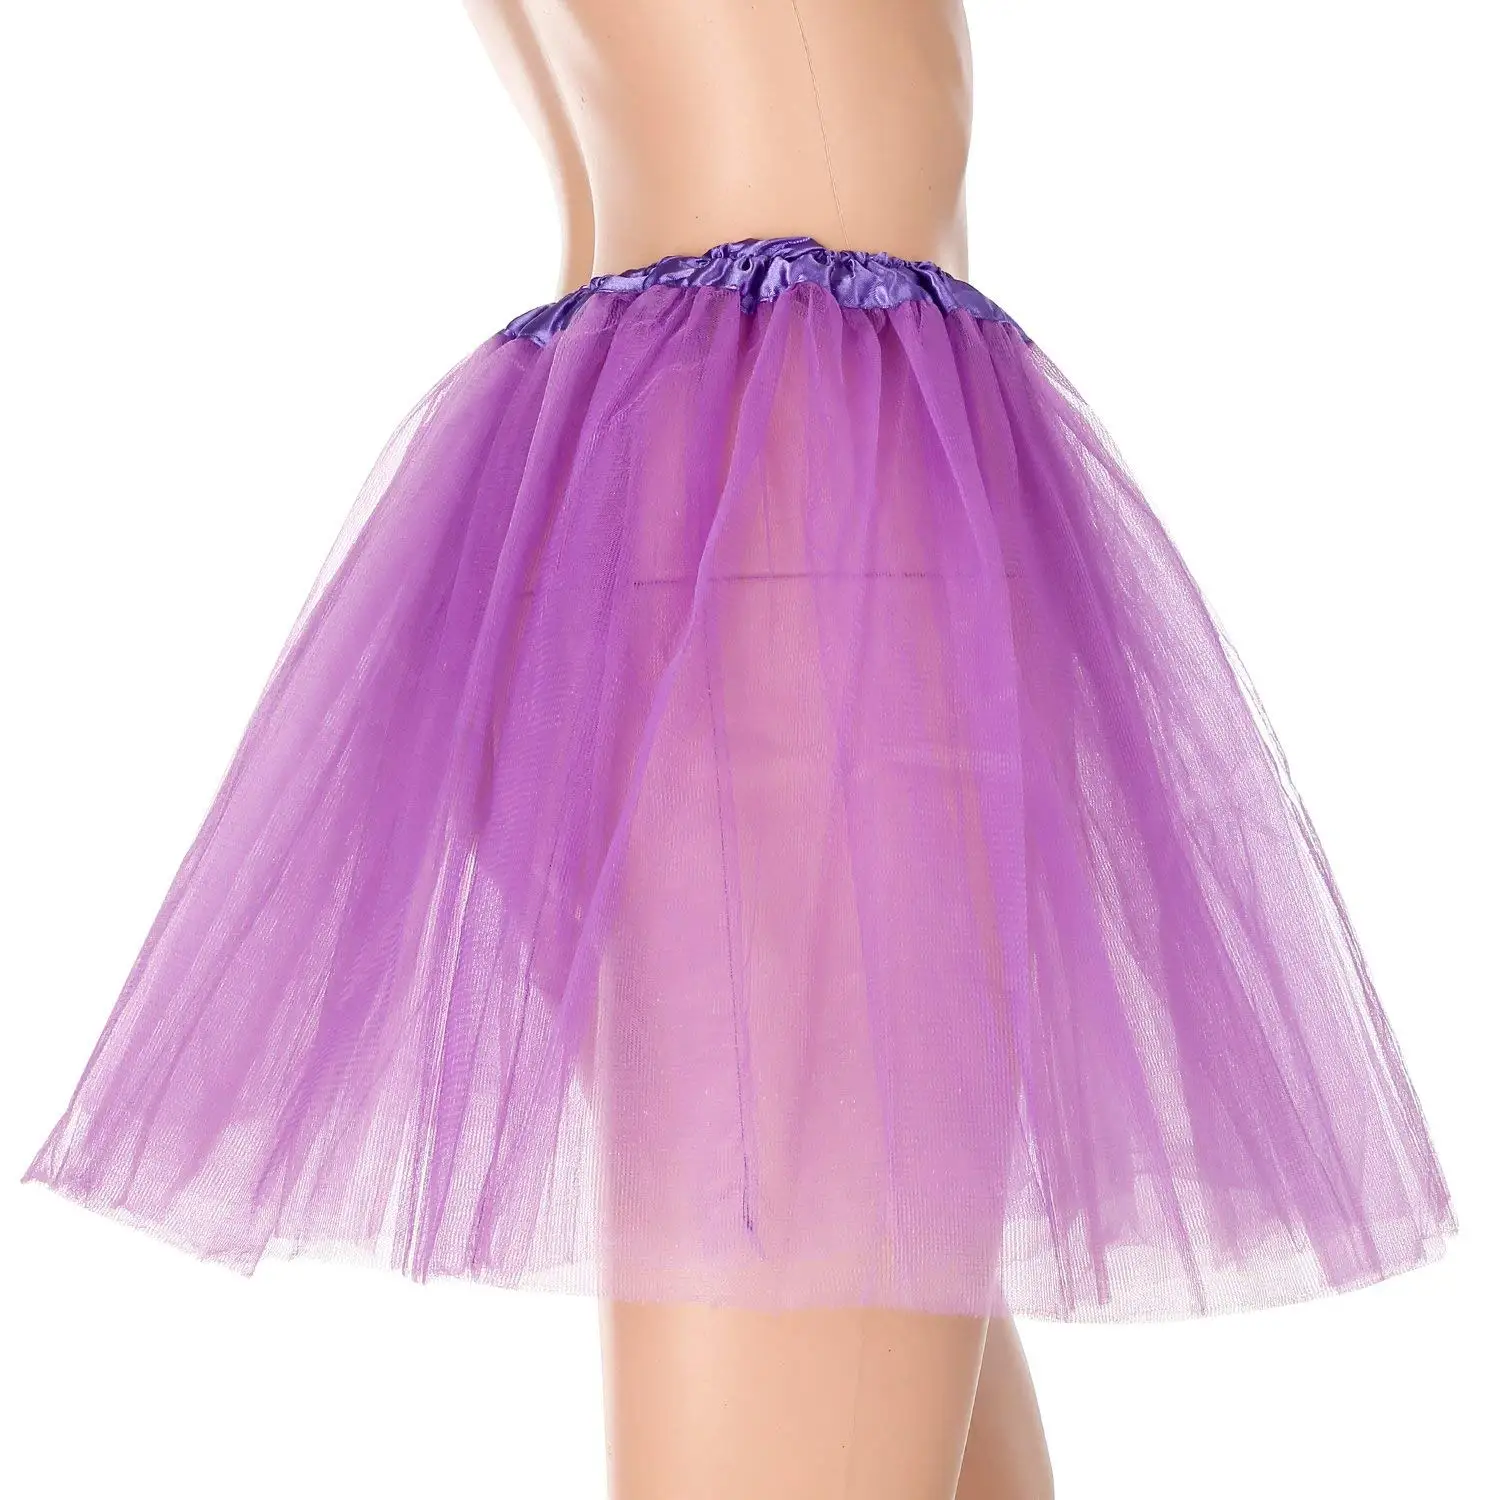 Cheap Tutus For Girls Size 16, find Tutus For Girls Size 16 deals on ...